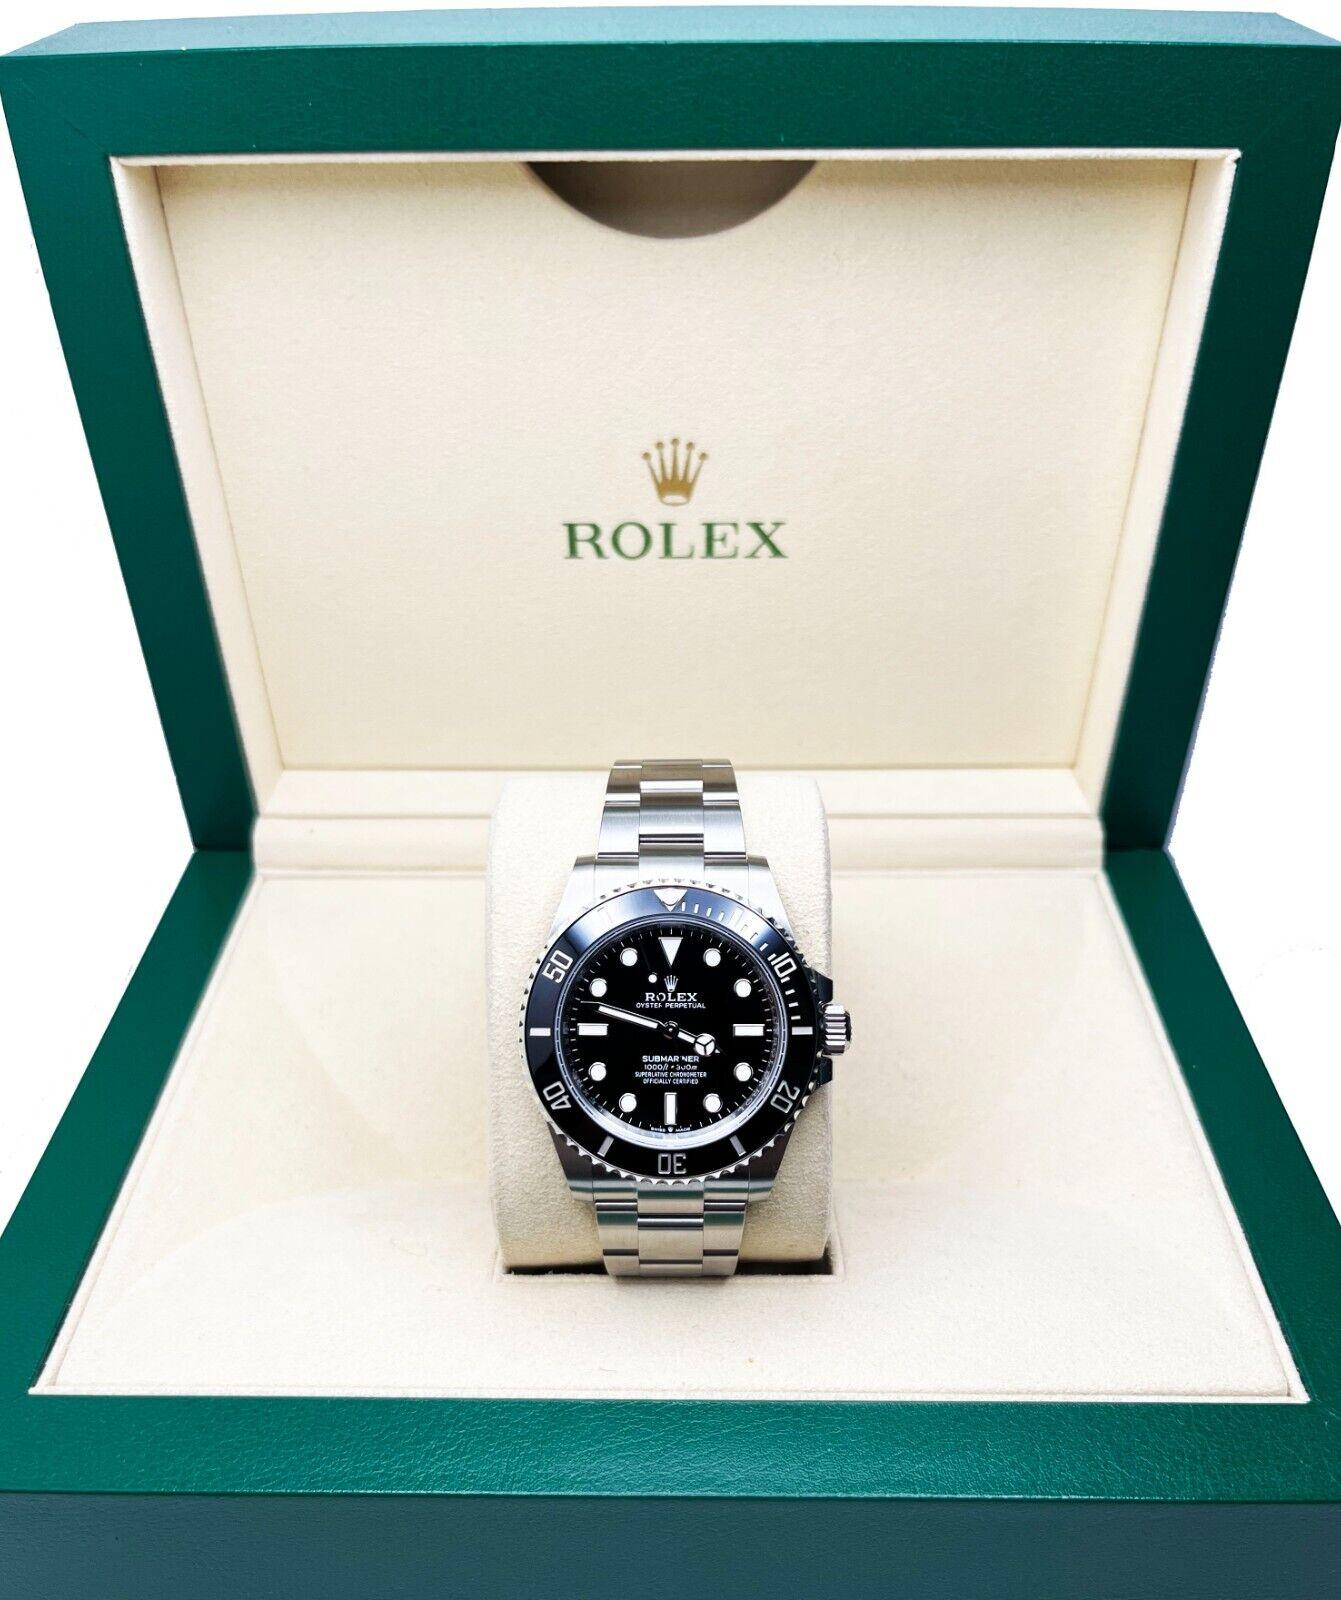 Style Number: 124060

Serial:2542Q***

Year: 2023
 
Model: Submariner
 
Case Material: Stainless Steel
 
Band: Stainless Steel
 
Bezel: Black Ceramic Bezel 
 
Dial: Black
 
Face: Sapphire Crystal 
 
Case Size: 41mm 
 
Includes: 
-Rolex Box &